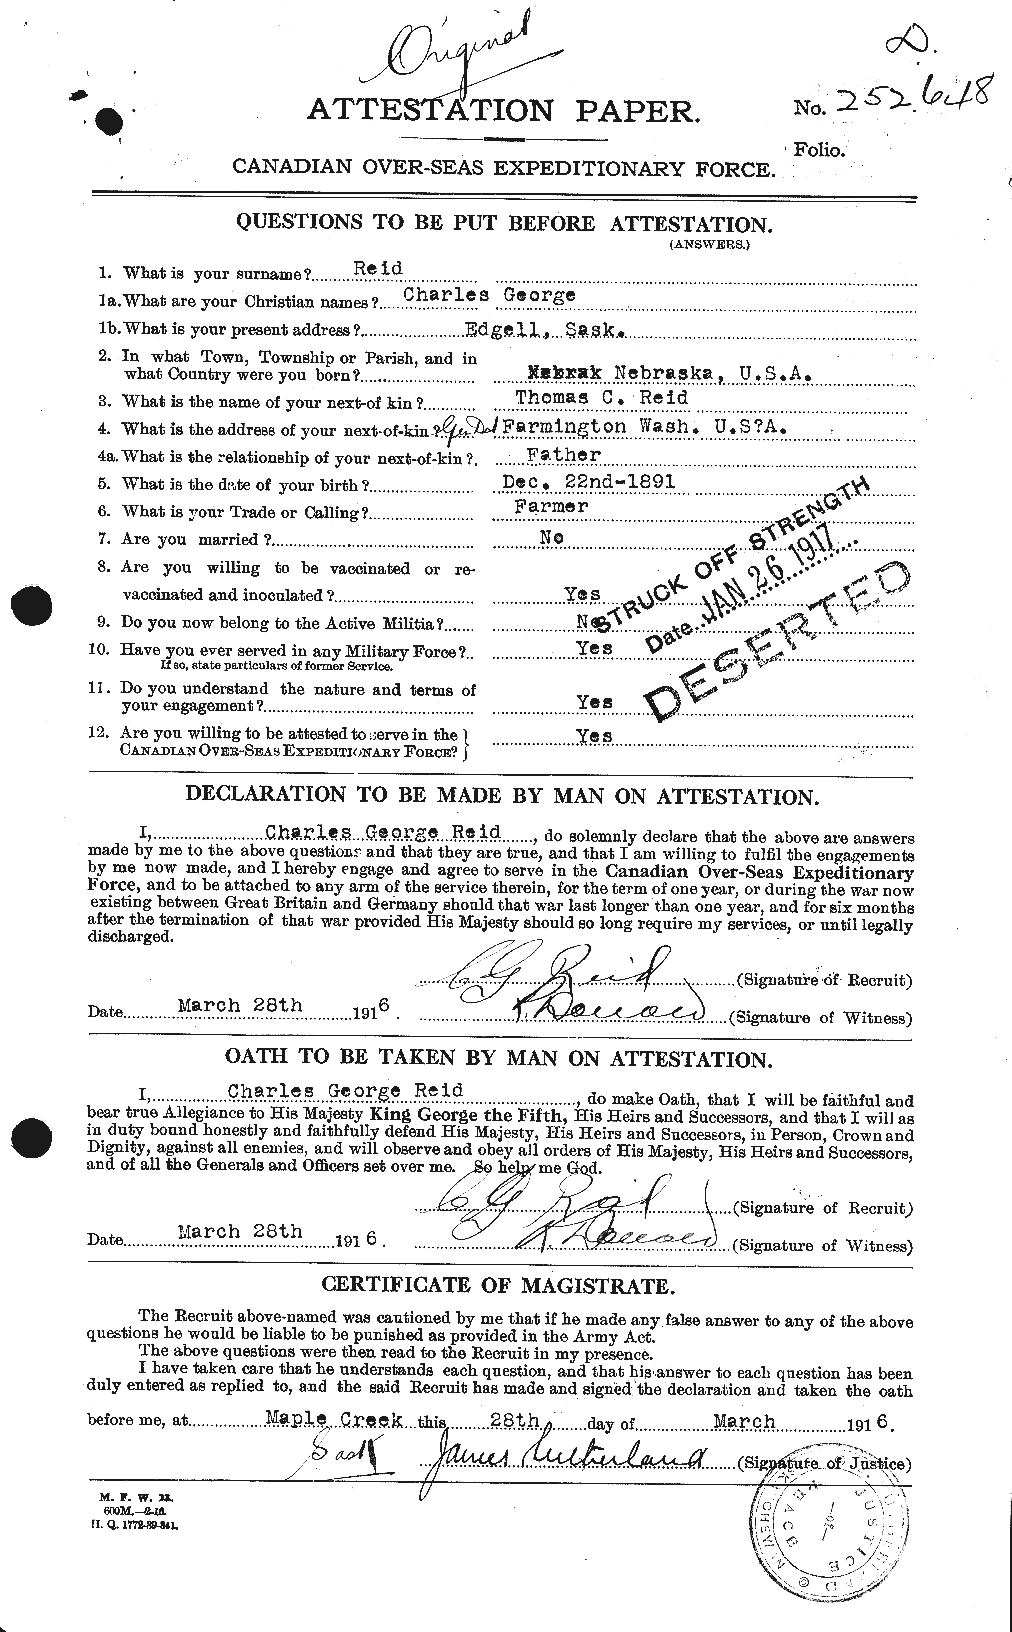 Personnel Records of the First World War - CEF 597888a